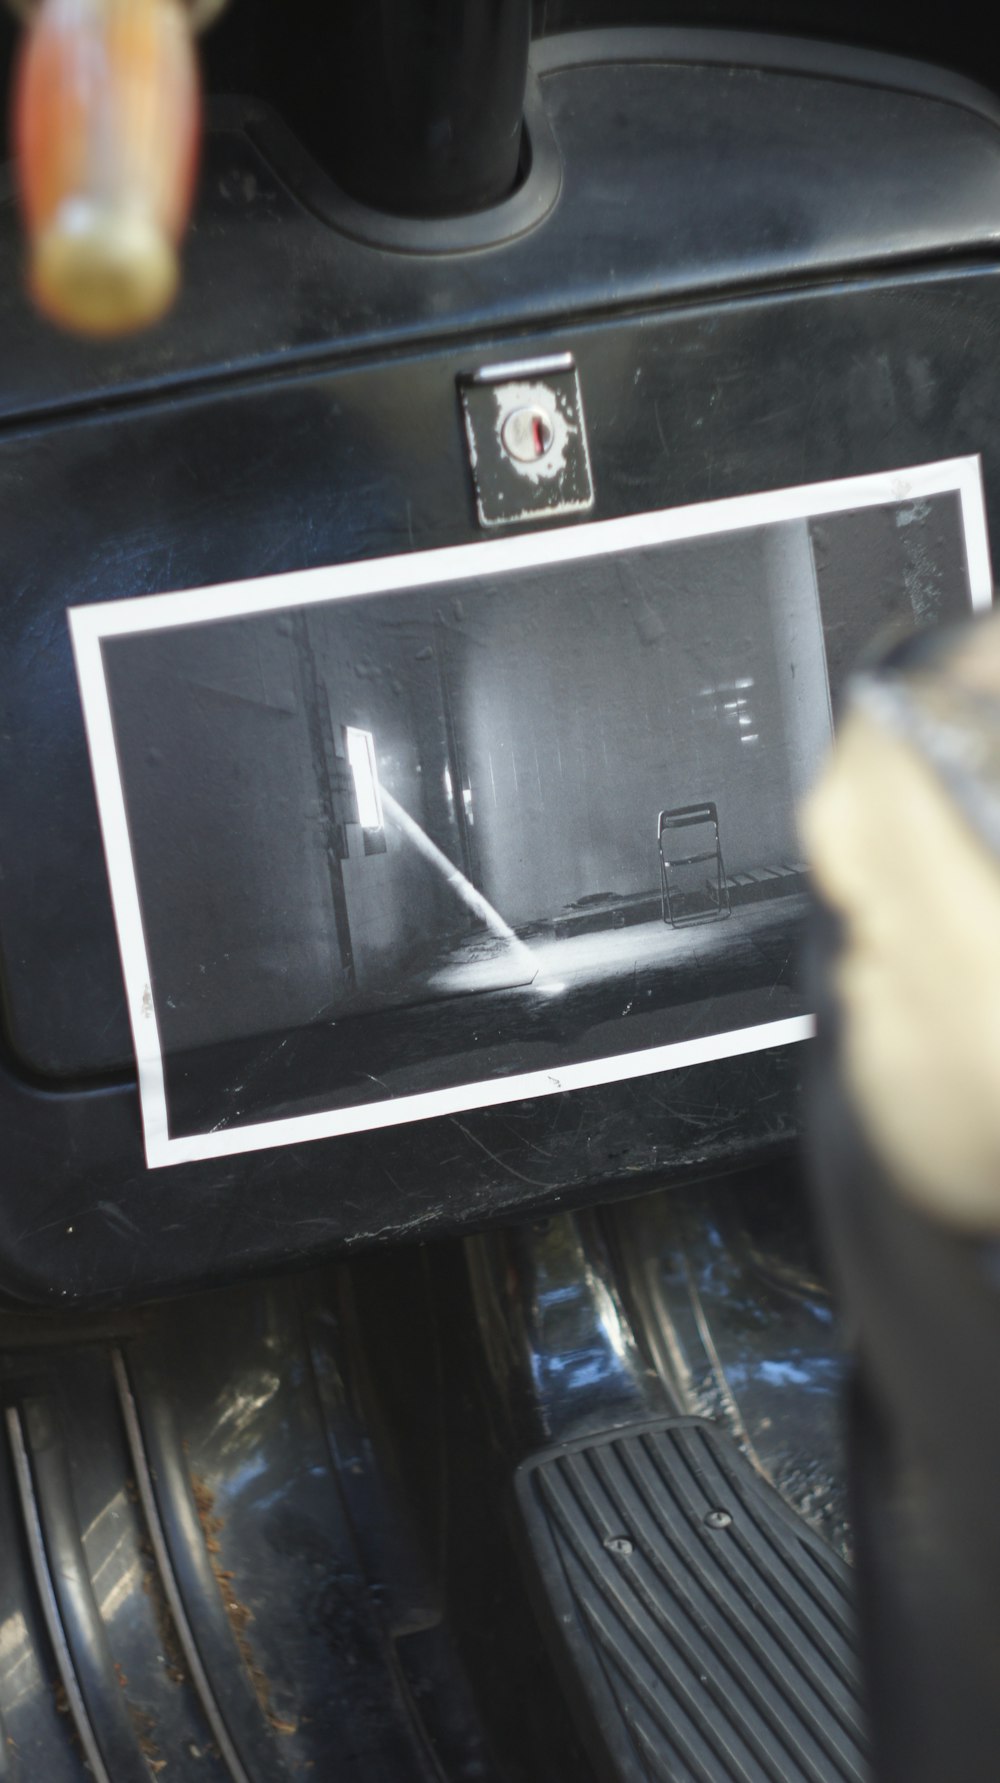 a close up of a microwave oven in a car